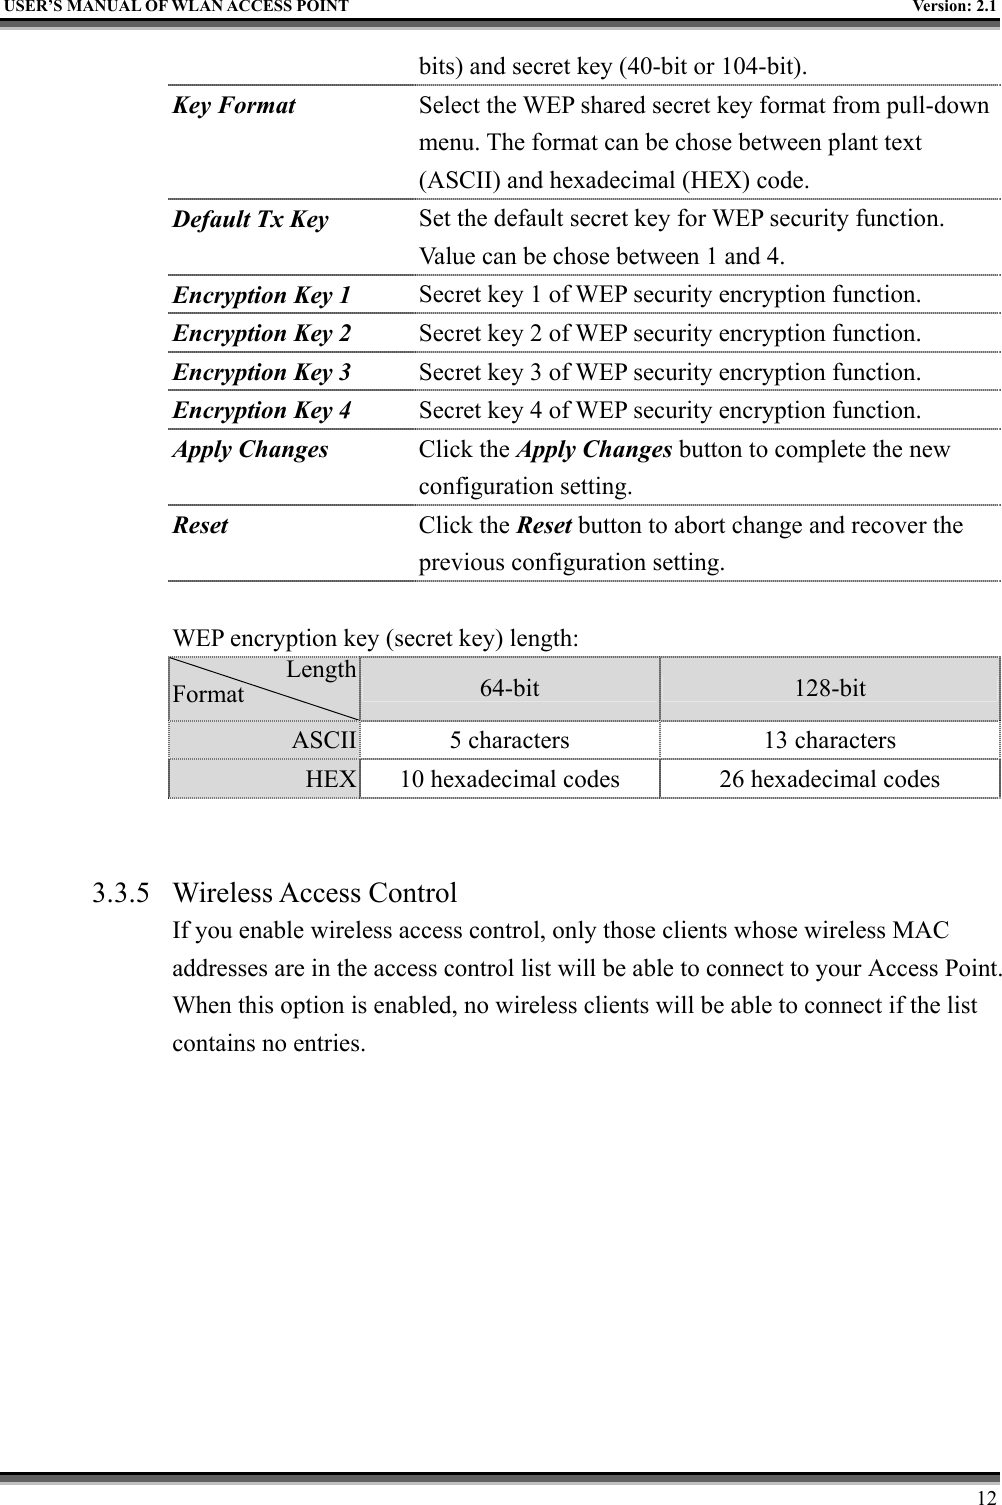   USER’S MANUAL OF WLAN ACCESS POINT    Version: 2.1     12 bits) and secret key (40-bit or 104-bit). Key Format Select the WEP shared secret key format from pull-down menu. The format can be chose between plant text (ASCII) and hexadecimal (HEX) code. Default Tx Key Set the default secret key for WEP security function. Value can be chose between 1 and 4. Encryption Key 1 Secret key 1 of WEP security encryption function. Encryption Key 2  Secret key 2 of WEP security encryption function. Encryption Key 3  Secret key 3 of WEP security encryption function. Encryption Key 4  Secret key 4 of WEP security encryption function. Apply Changes Click the Apply Changes button to complete the new configuration setting. Reset  Click the Reset button to abort change and recover the previous configuration setting.  WEP encryption key (secret key) length: Length Format  64-bit  128-bit ASCII  5 characters  13 characters HEX  10 hexadecimal codes  26 hexadecimal codes   3.3.5 Wireless Access Control If you enable wireless access control, only those clients whose wireless MAC addresses are in the access control list will be able to connect to your Access Point. When this option is enabled, no wireless clients will be able to connect if the list contains no entries. 